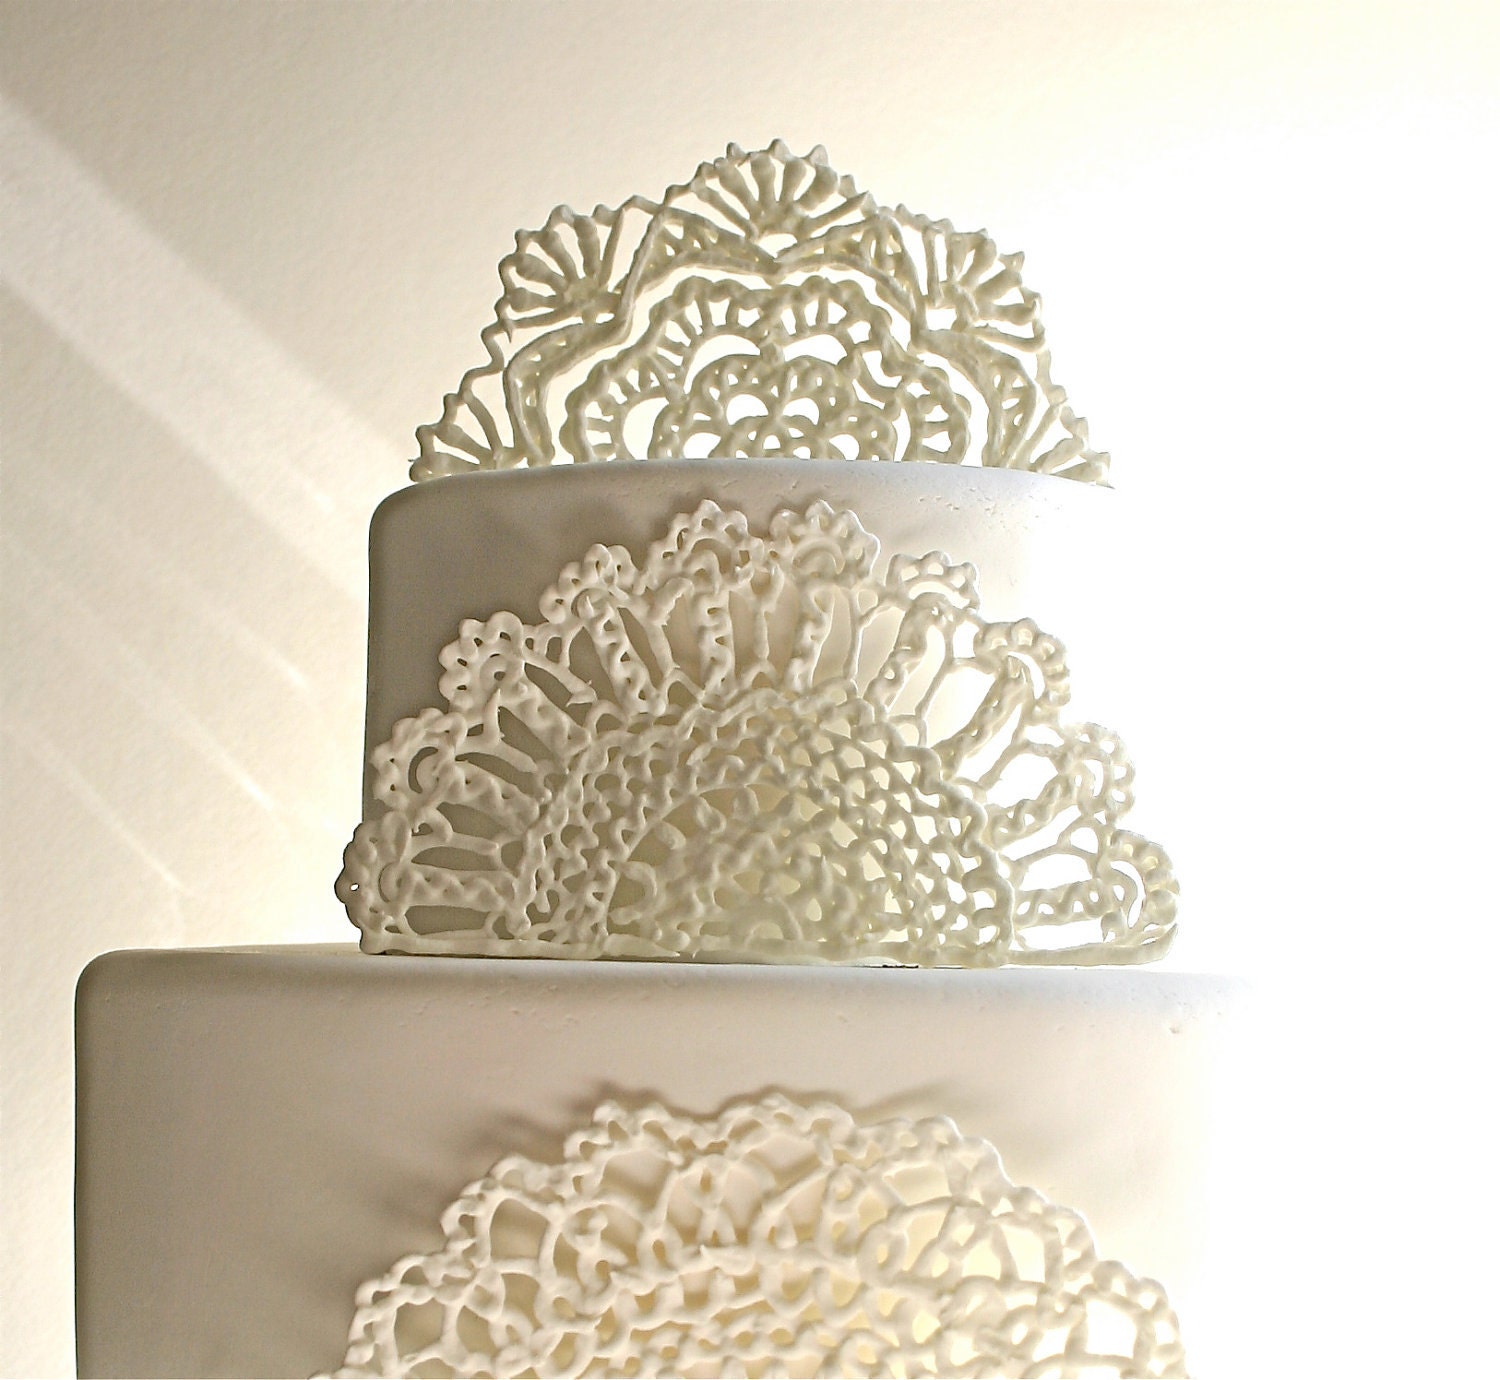 Sugar Doilies, Sugar Lace, Edible Cake Embellishments/Decorations 3 - andiespecialtysweets